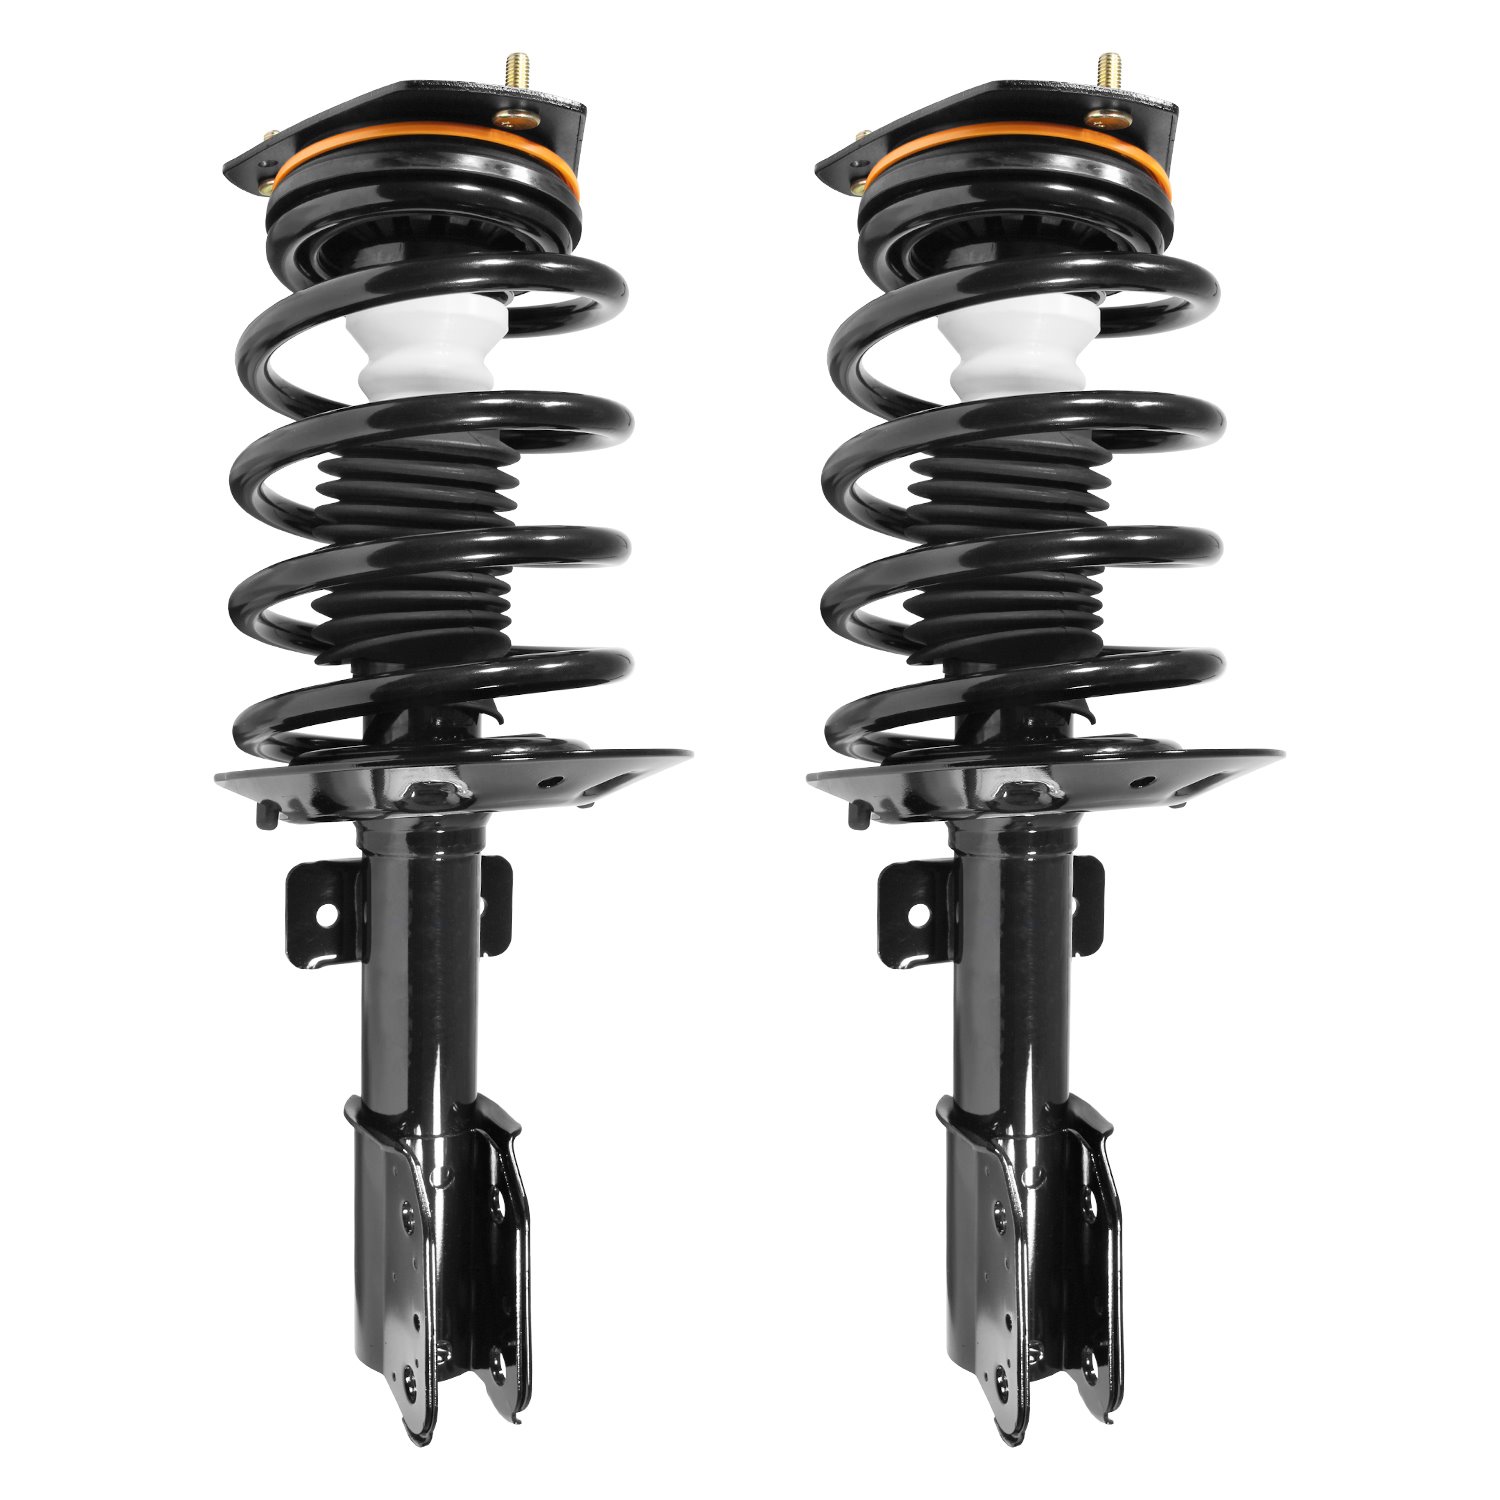 2-11190-001 Suspension Strut & Coil Spring Assembly Set Fits Select Buick Terraza, Chevy Uplander, Pontiac Montana, Saturn Relay